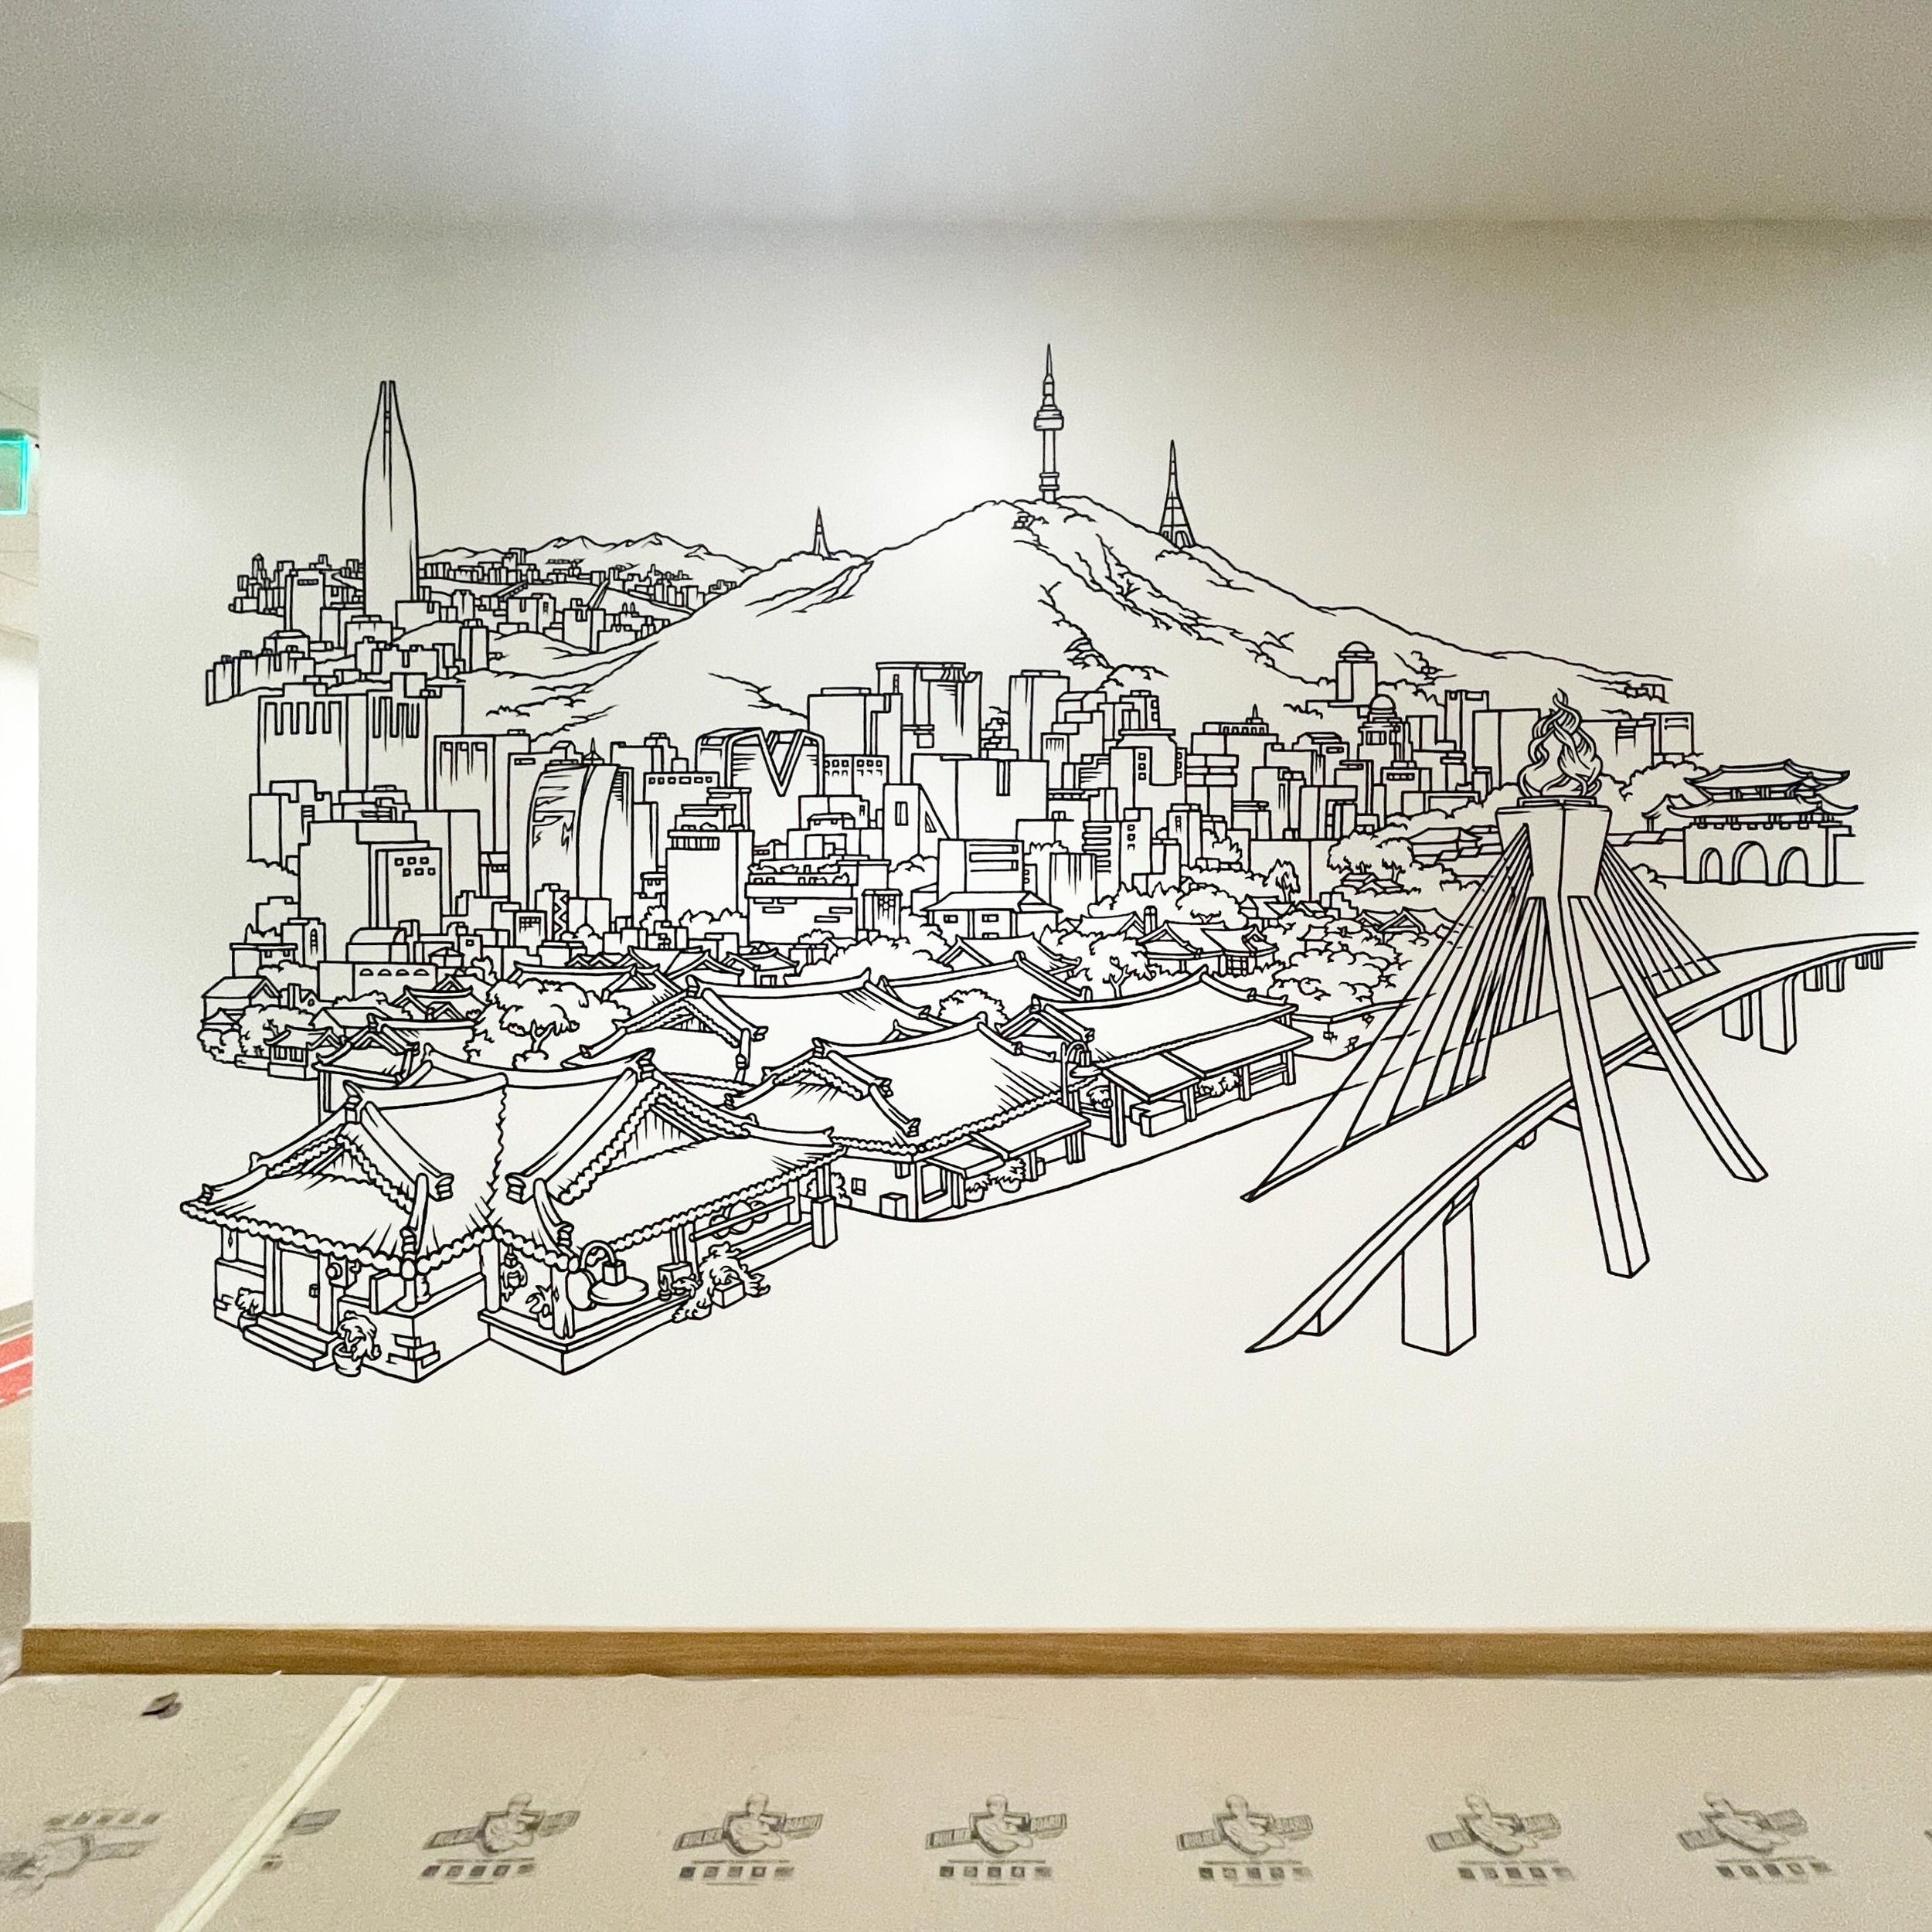 New office mural that will be a mashup of Seoul and the Bay. This is the Seoul side